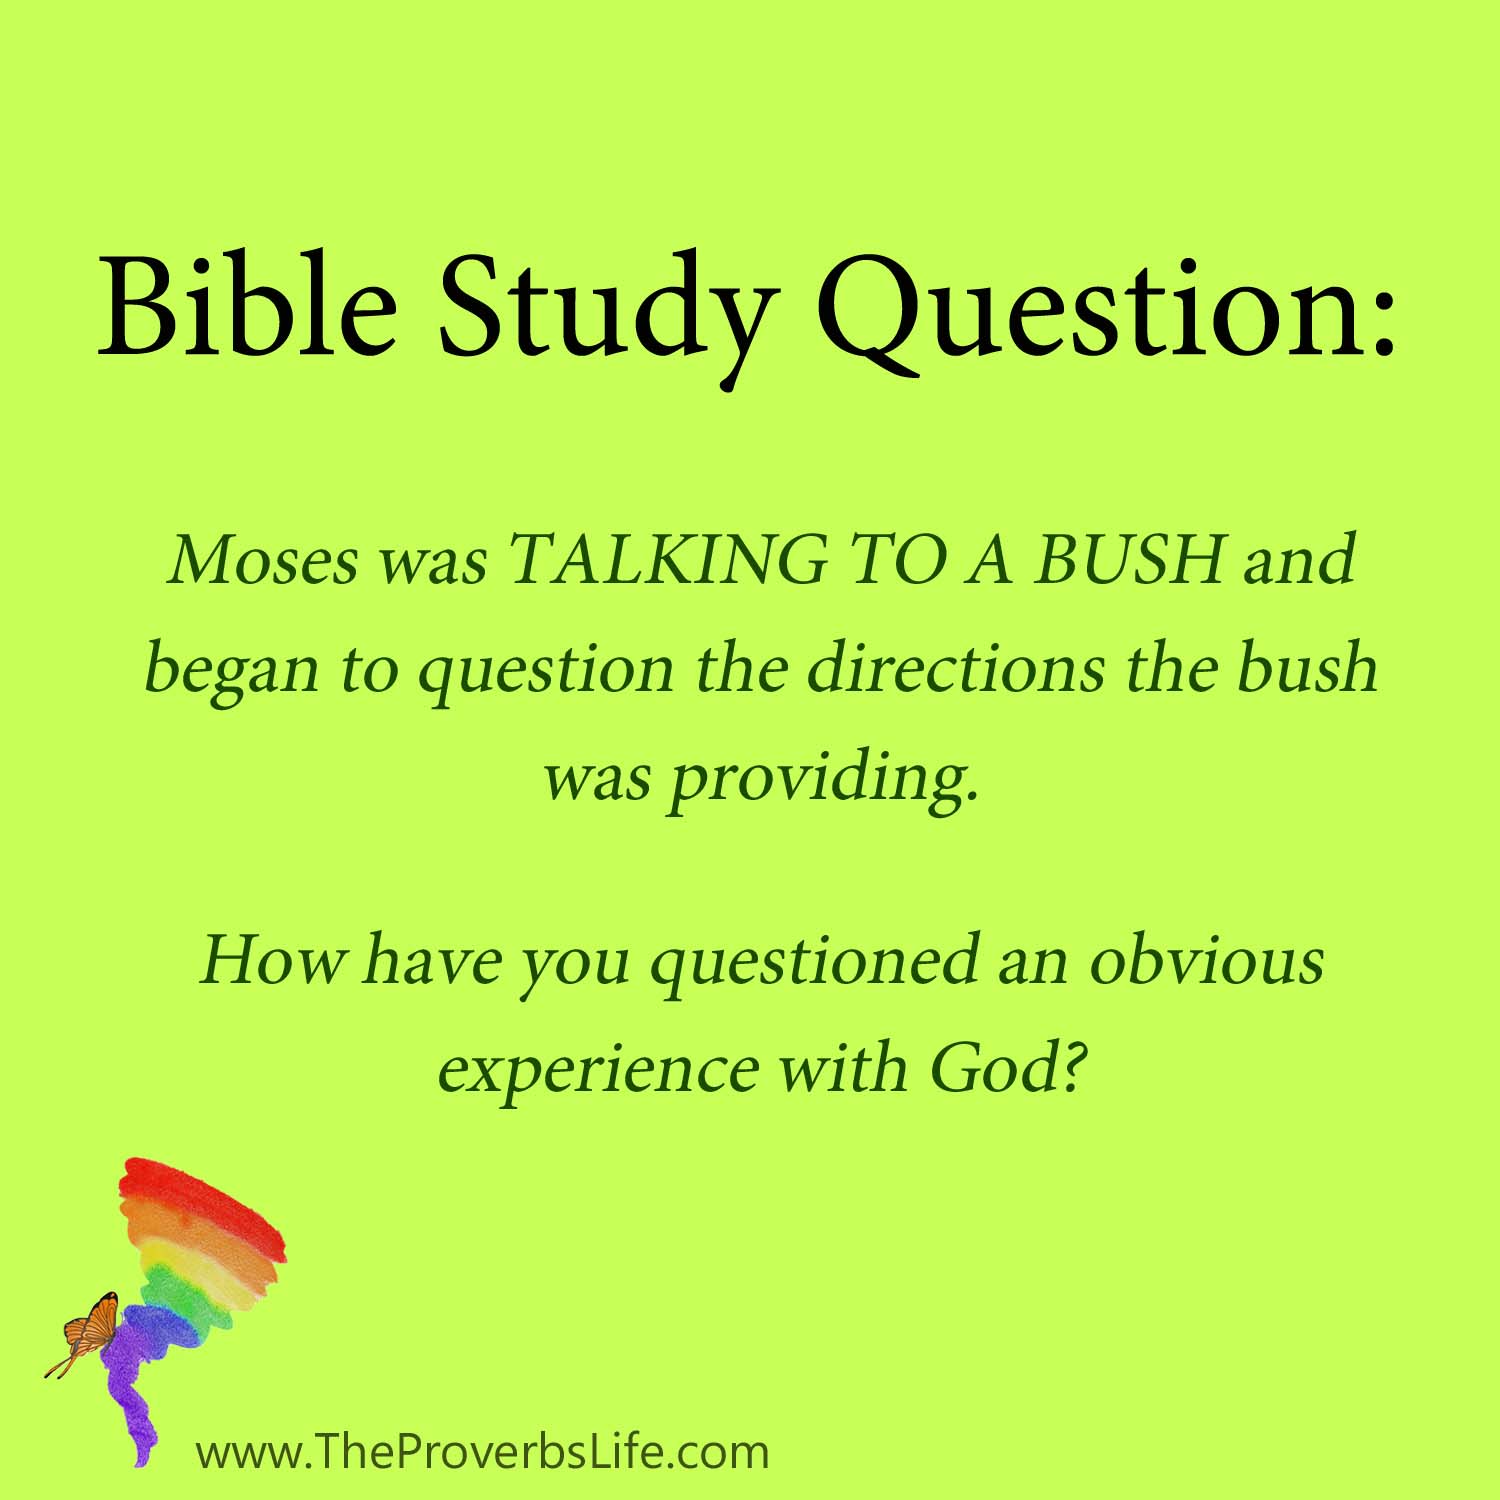 Bible Study Question - obvious experience with God